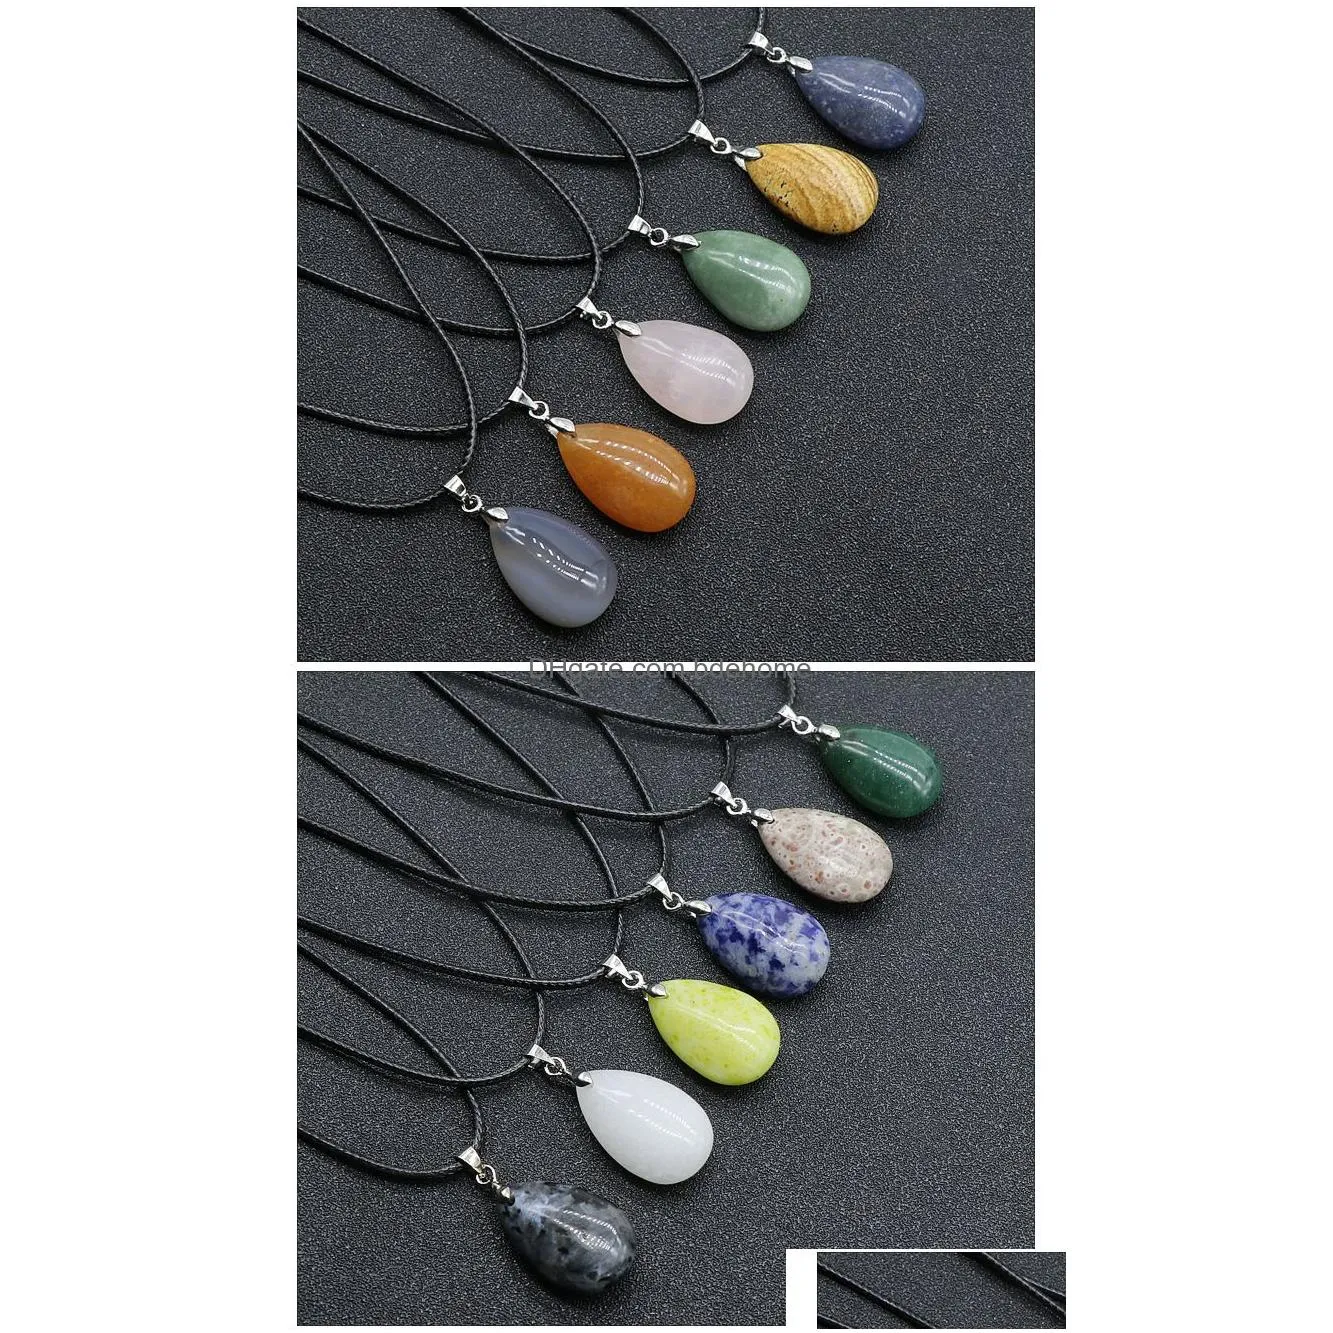 natural stone flat waterdrop shape pendant necklace jade quartz healing crystal rope chain collar for women fashion jewelry